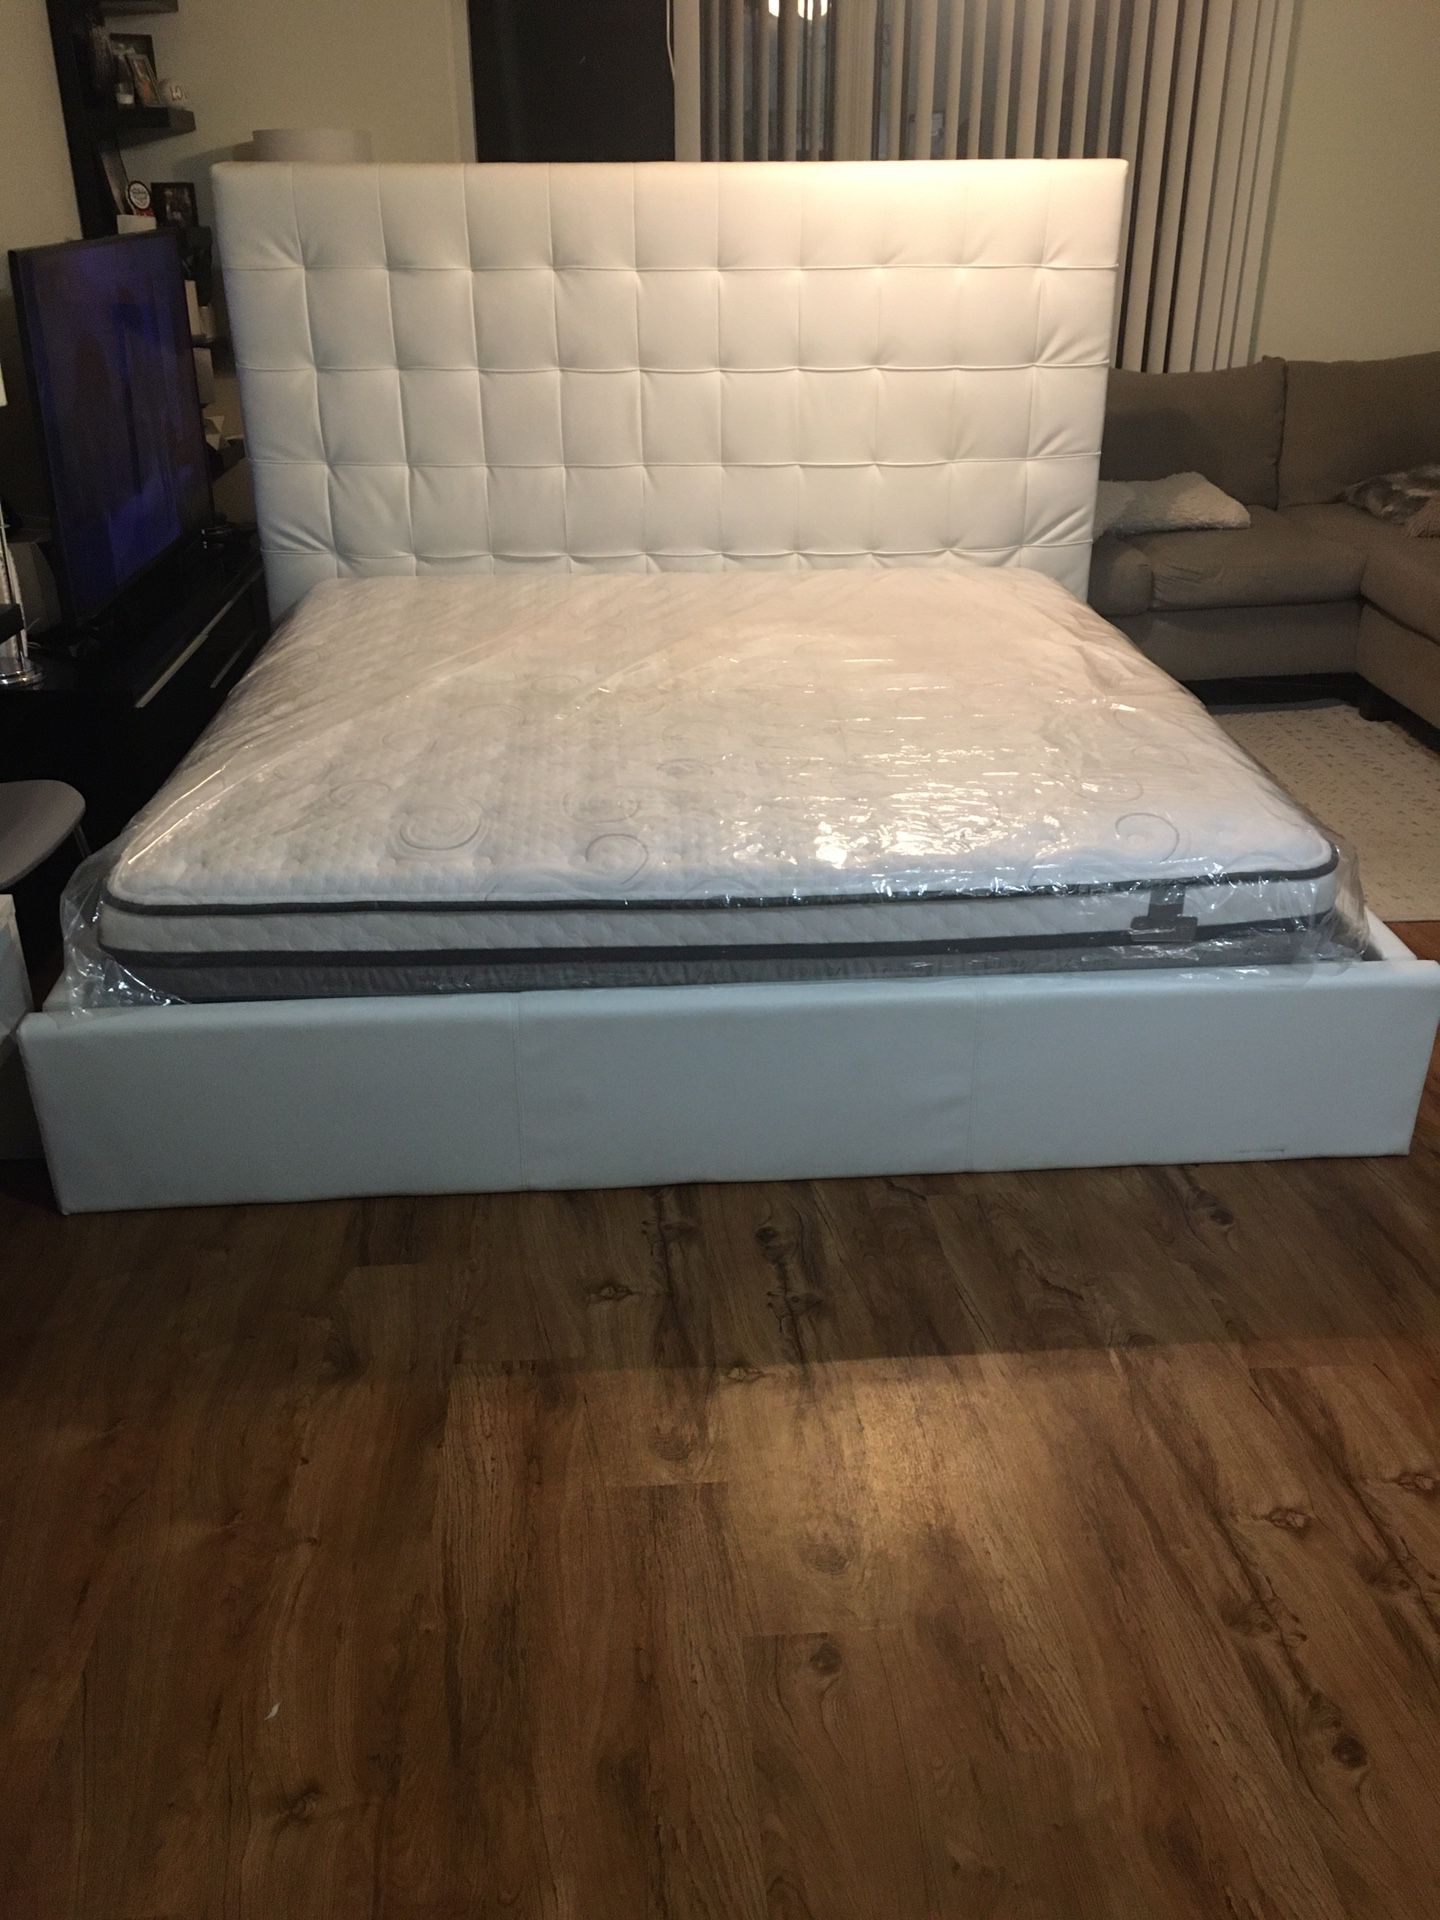 King Bed Frame And Mattress